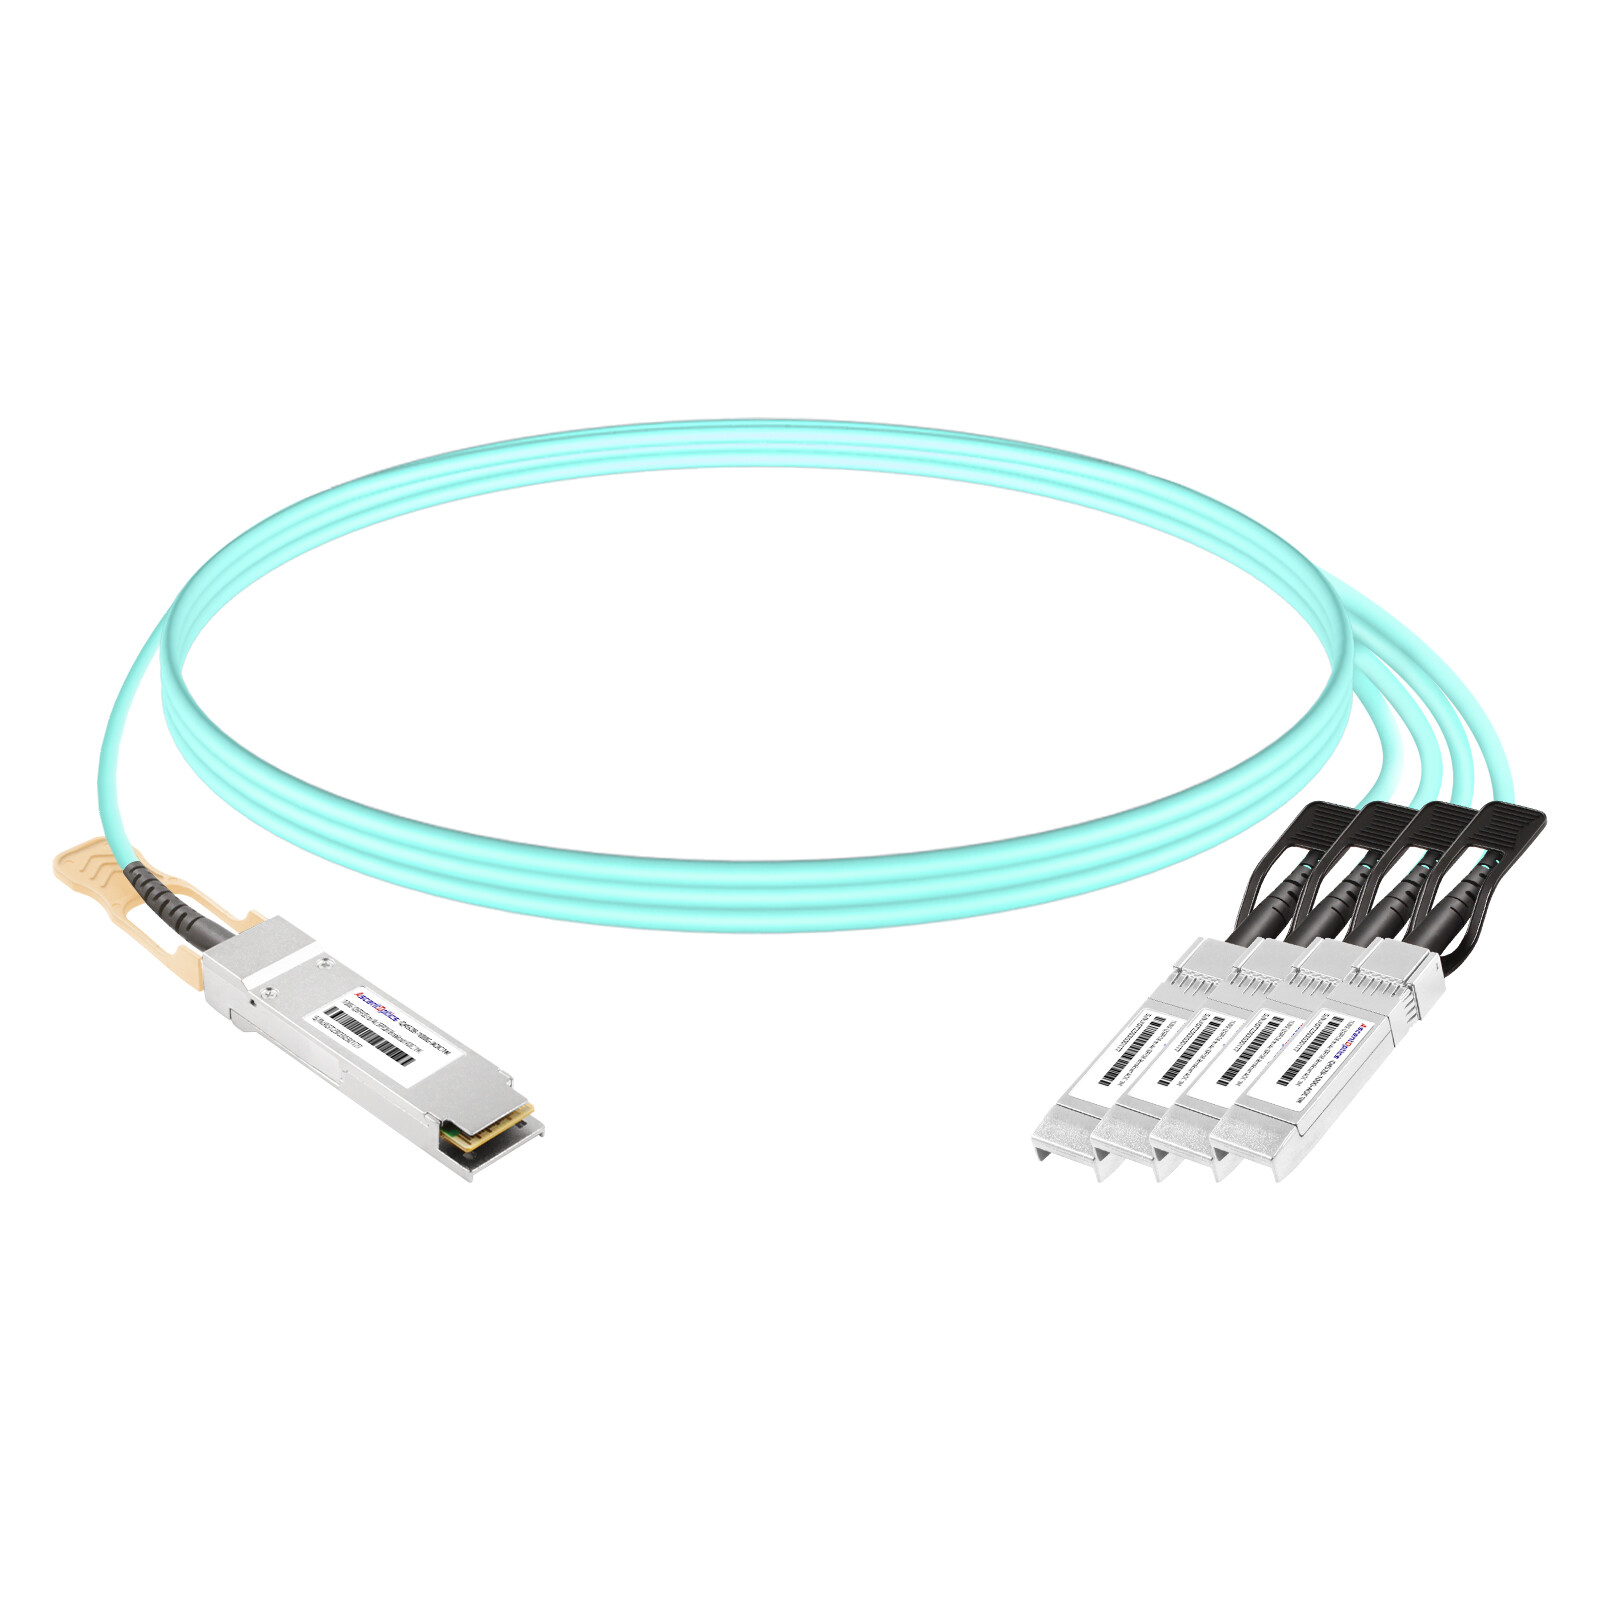 100G QSFP28 to 4x 25G SFP28 Breakout AOC Cable,1 Meter